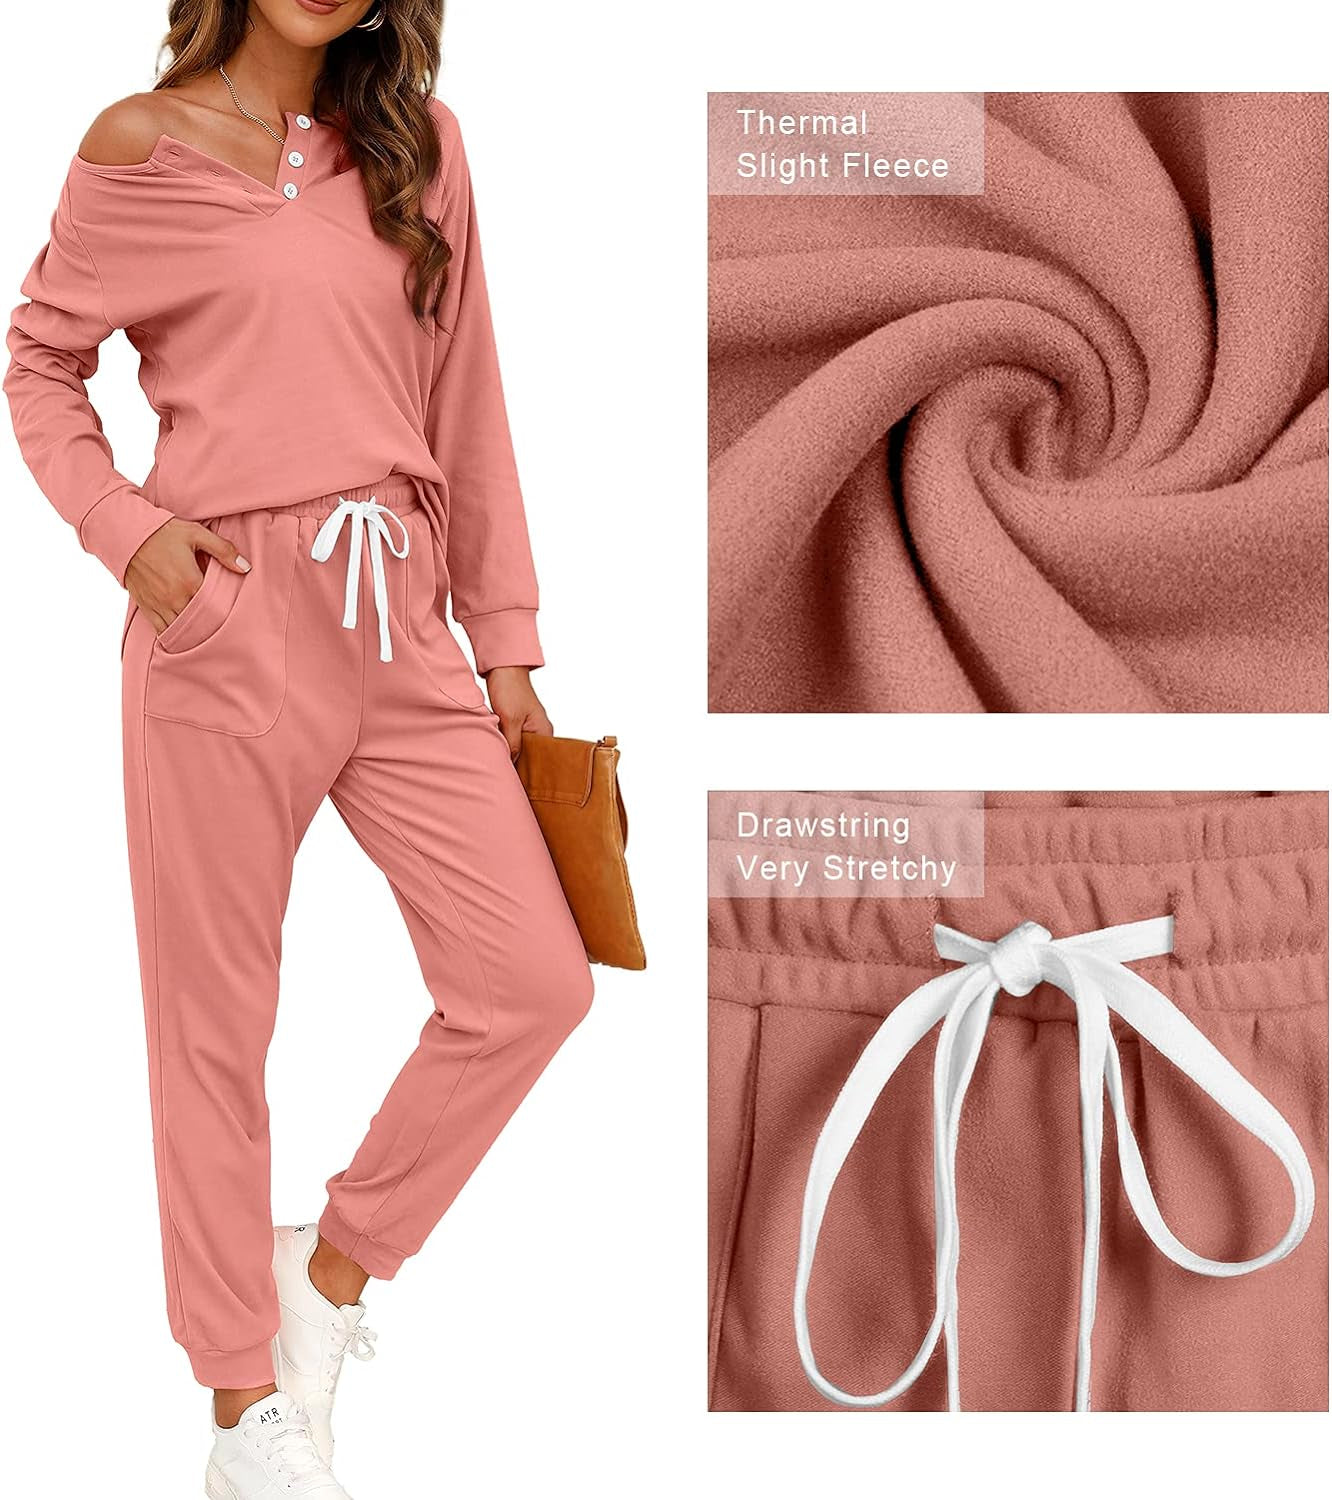 "Cozy and Chic: Women'S Two Piece Lounge Set with Button down Sweatshirt, Sweatpants, and Pockets"